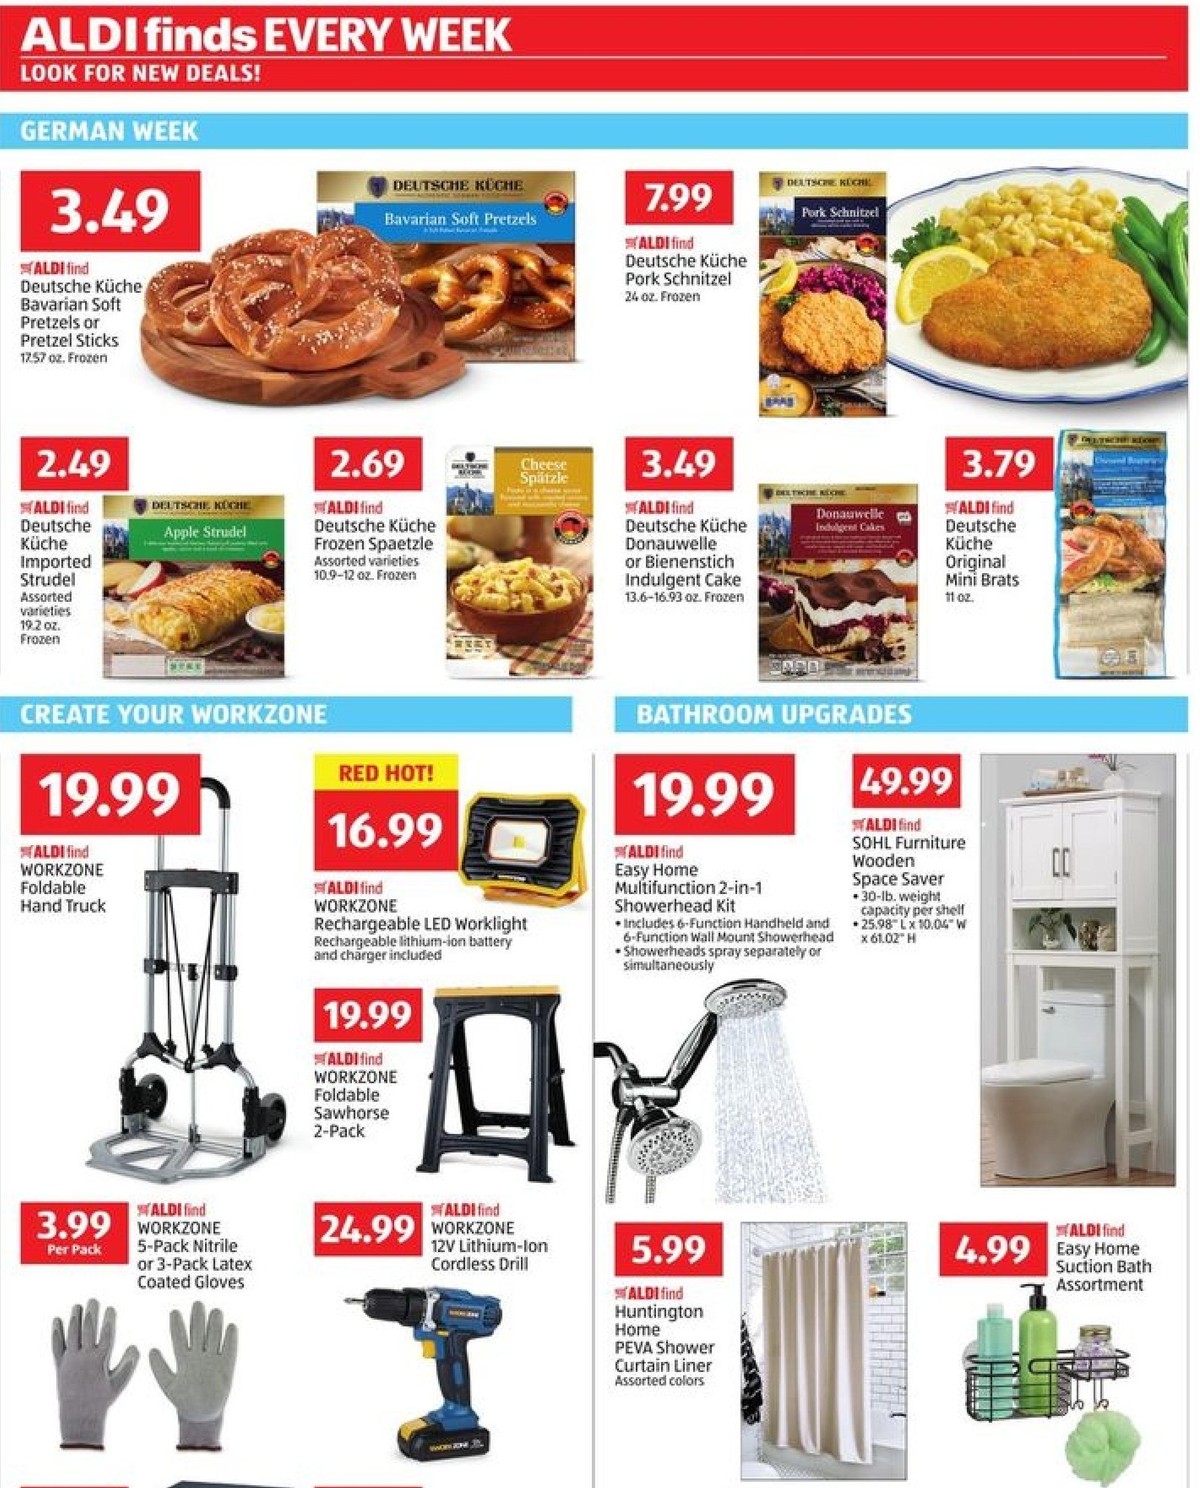 ALDI Weekly Ad from March 17